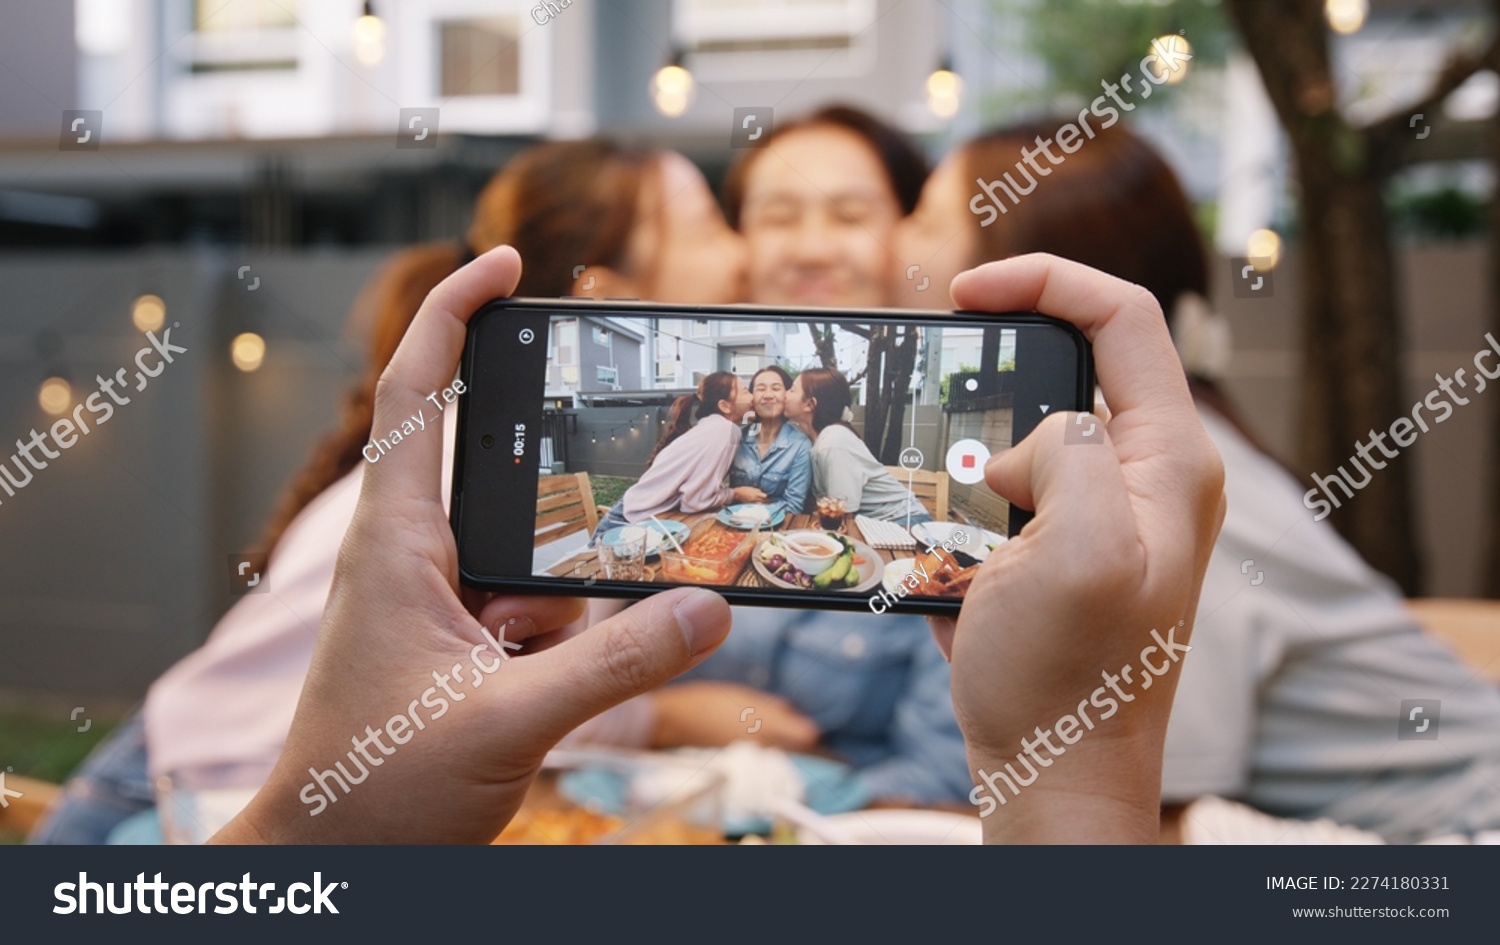 Young adult asia people hug cuddle kiss love care for mom taking photo selfie video on mobile phone camera at home picnic dining fun night party dine table. Relax older mum smile enjoy warm time meal. #2274180331